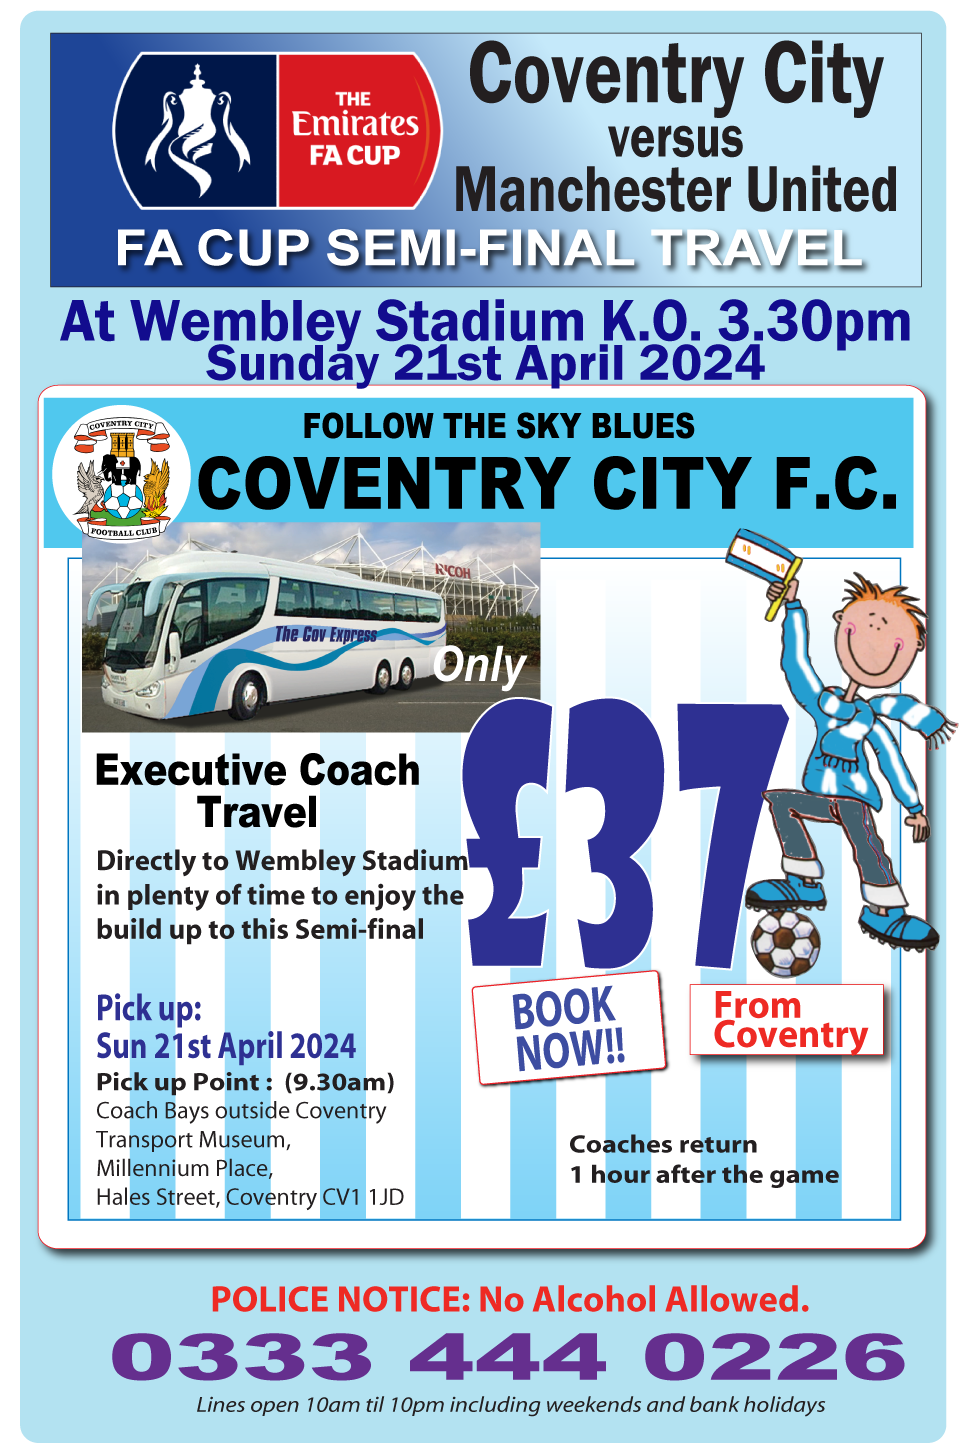 Coventry City versus Manchester United, FA Cup Semi-Final Travel at Wembley Stadium K.O. 3.15 Sunday 21st Apeil 2024. Follow the Sky Blues Coventry City F.C. Executive Coach Travel only £30 From Coventry directly to Wembley Stadium in plenty of time to enjoy the build-up to this Semi-final. Pick up: Sun 21sr May 2024. Pick up point: (9.30am)  Coach Bays outside Coventry Transport museum, Millennium Place, Hales Street, Coventry CV1 1JD. BOOK NOW!! Coaches return 1 hour after the the game.

 . 
<div class=